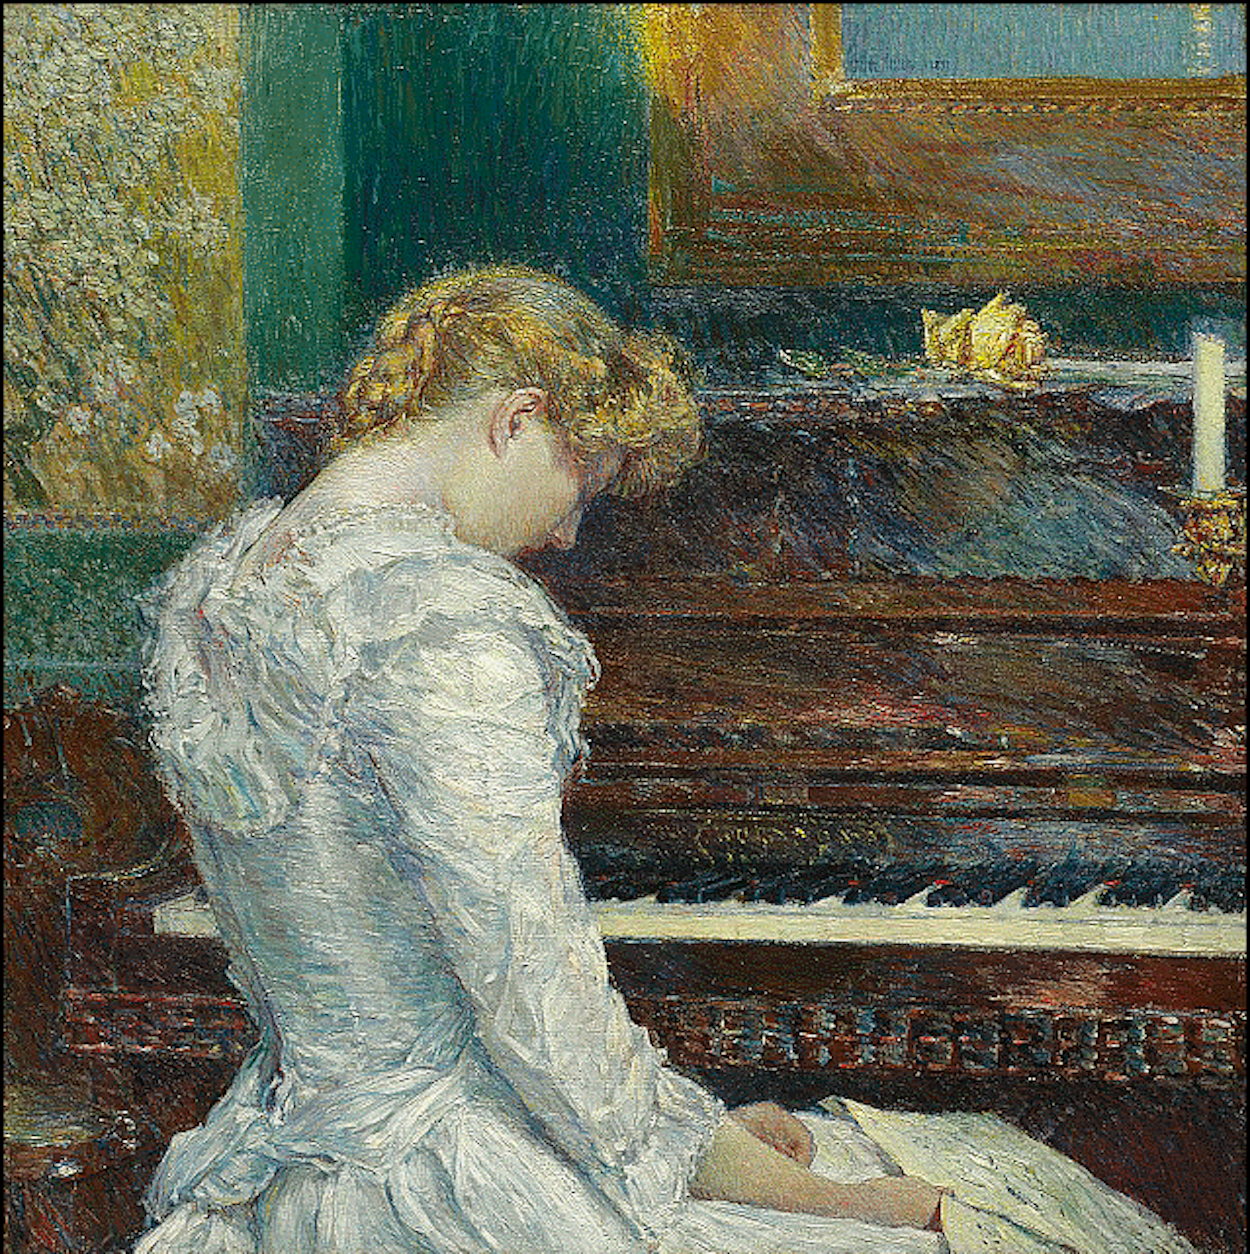 Соната by Frederick Childe Hassam - 1893 - 81.44 x 81.44 см 